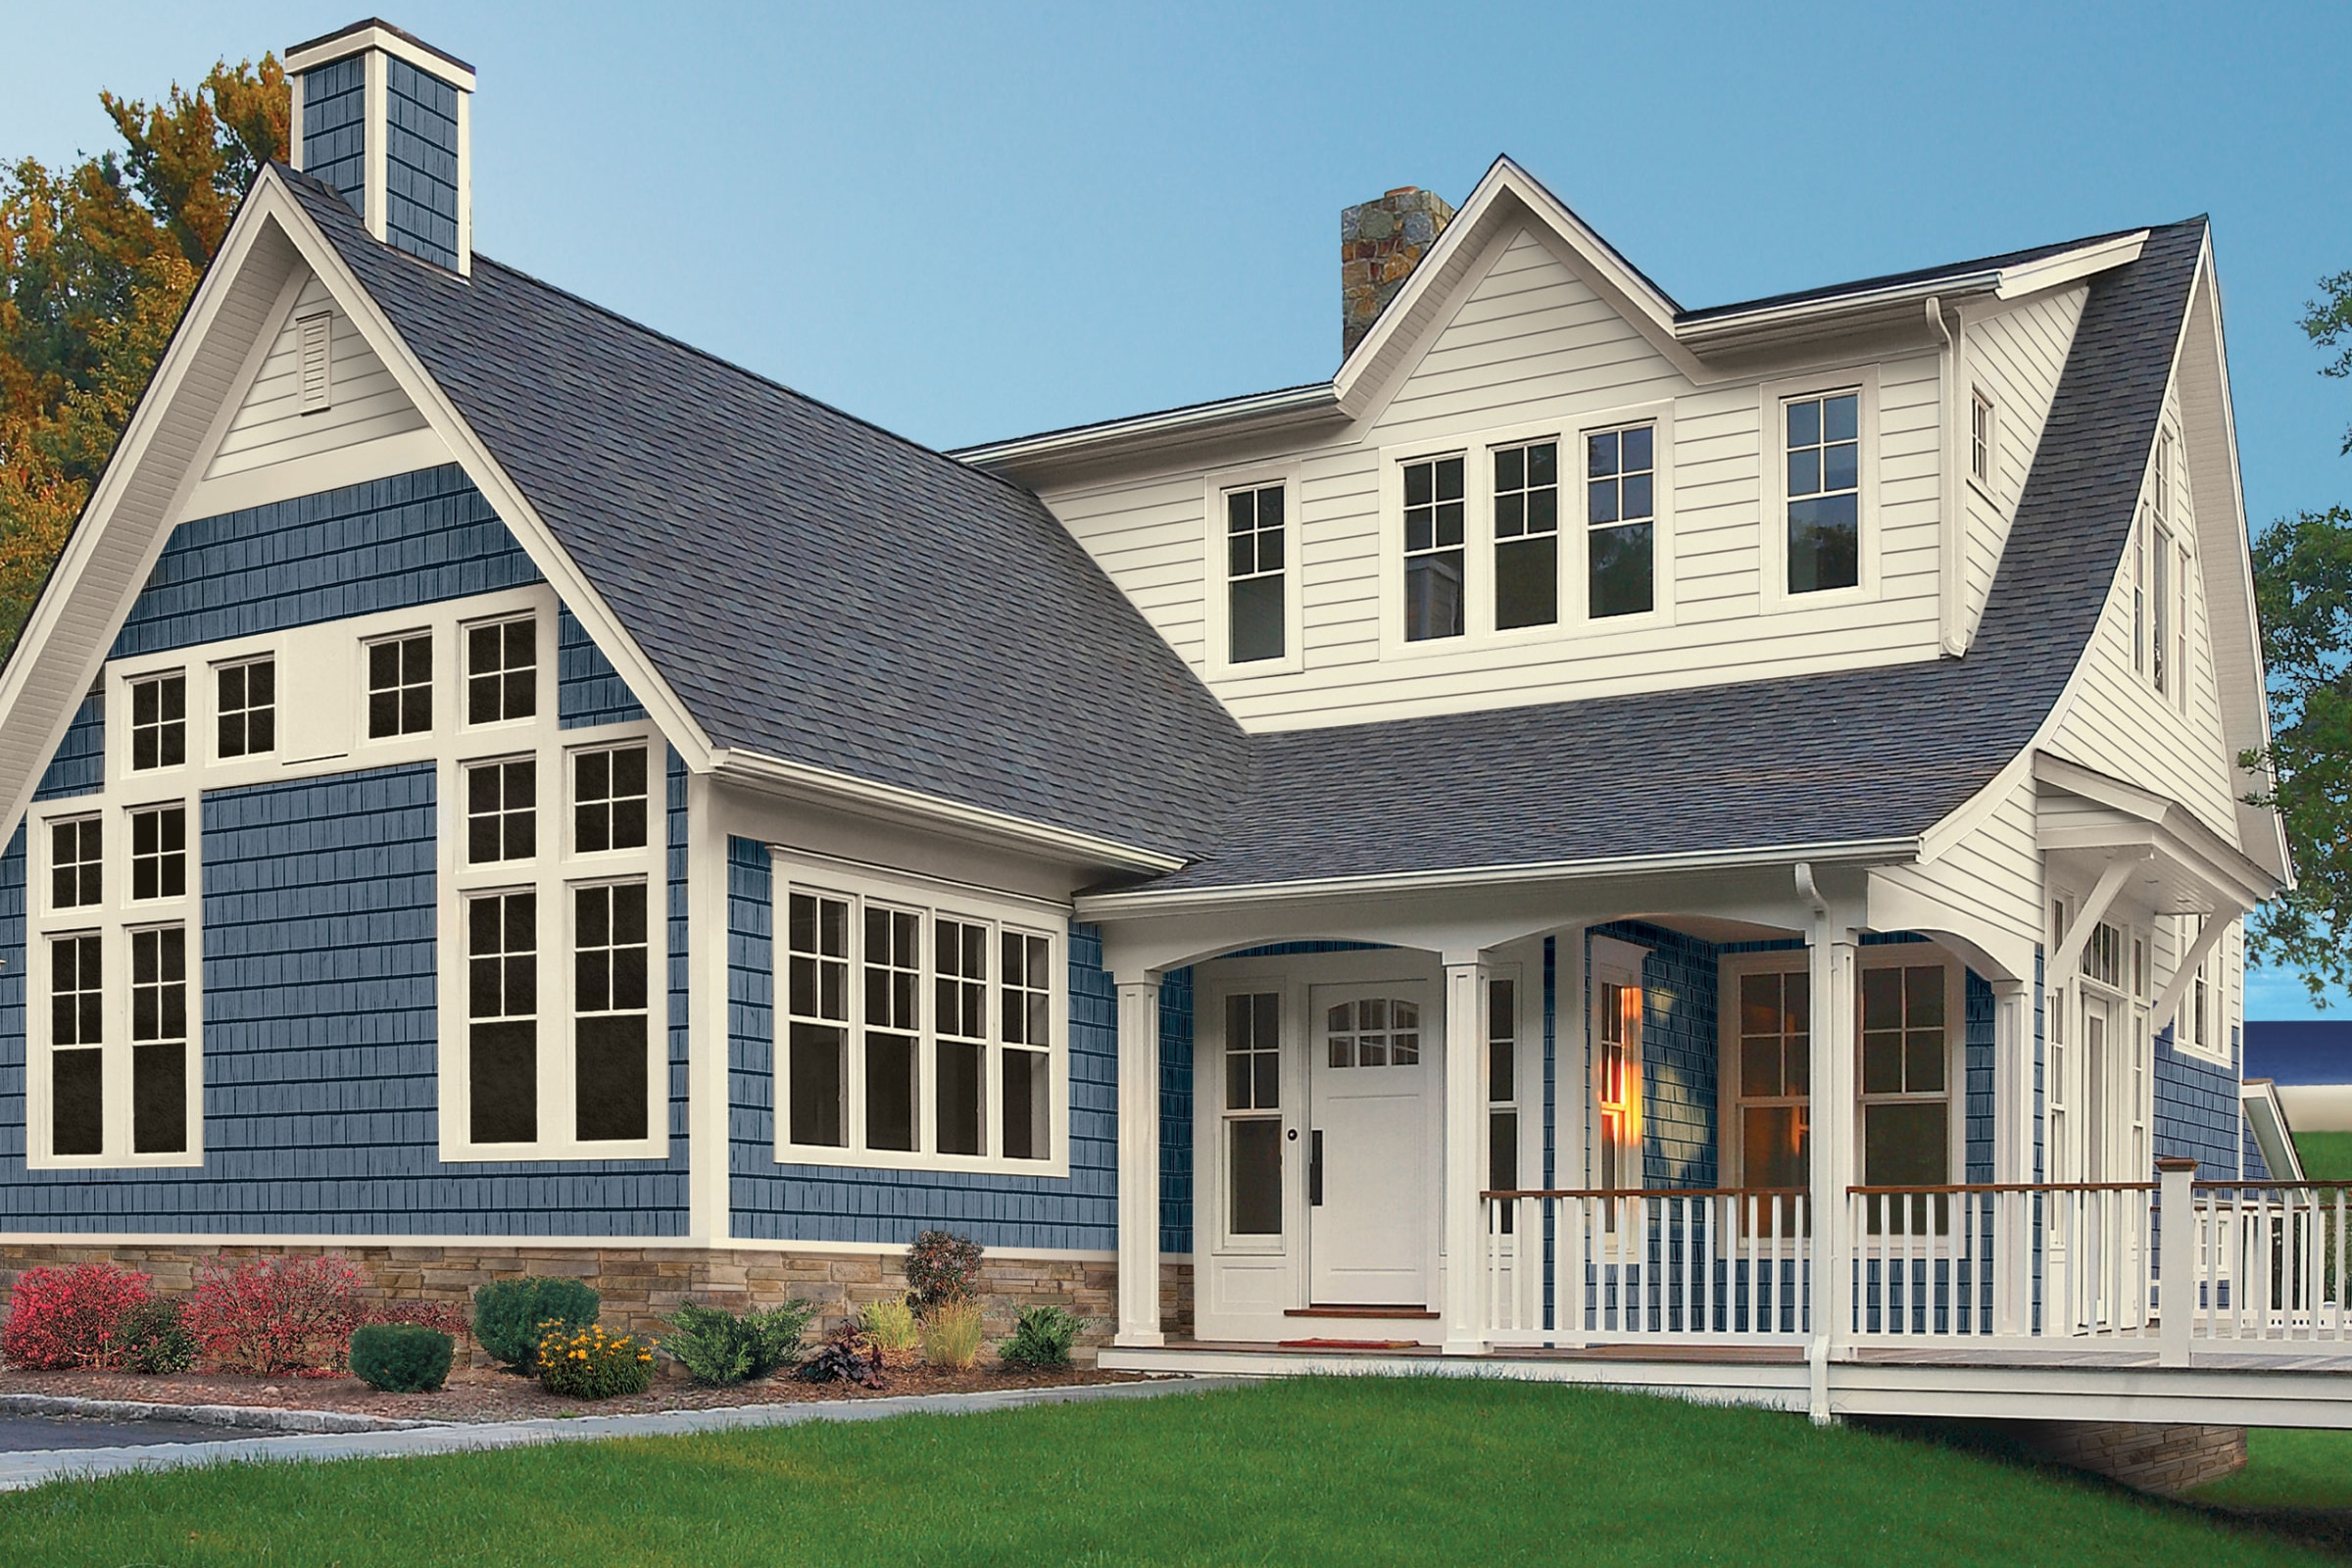 How Vinyl Siding Combines Exterior Design and Sustainability